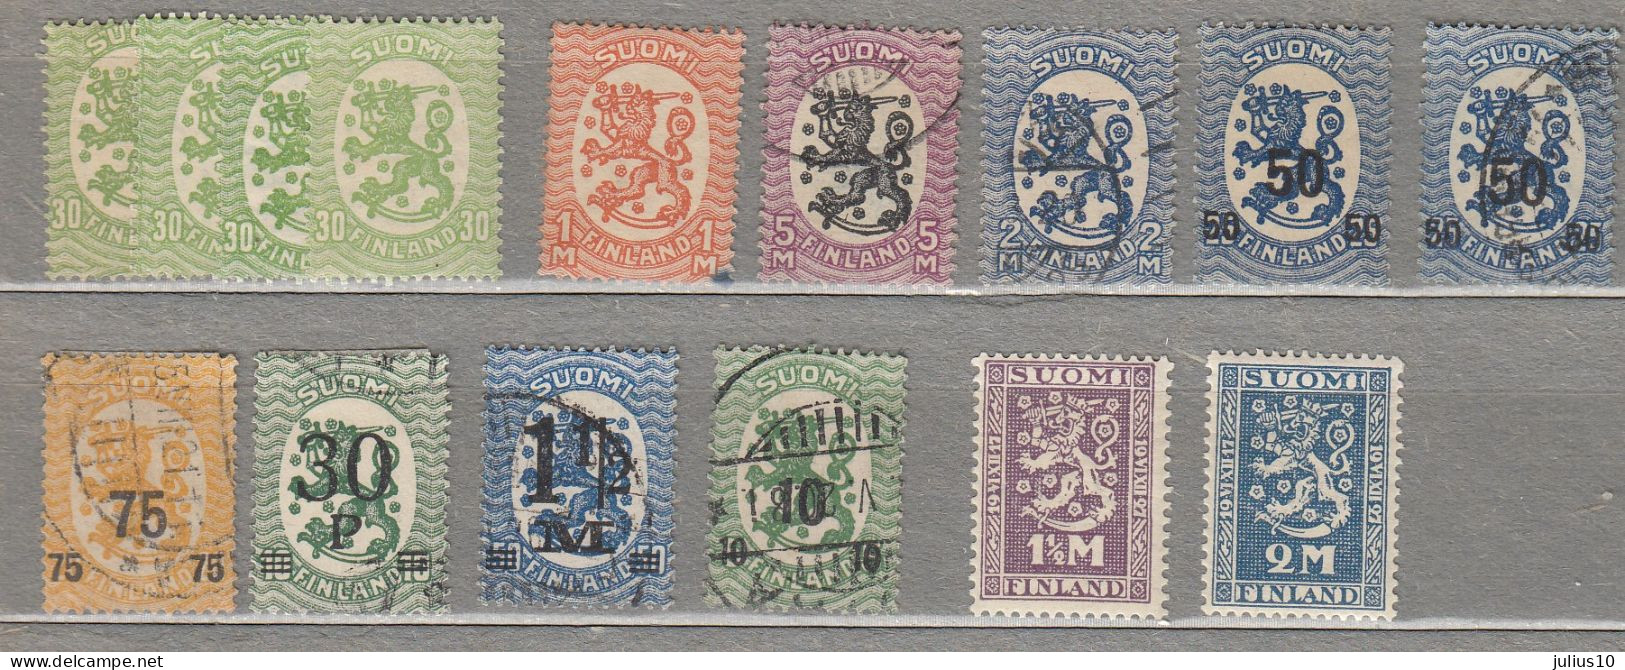 FINLAND 1917-1927 Used/Mint Stamps #22623 - Usati